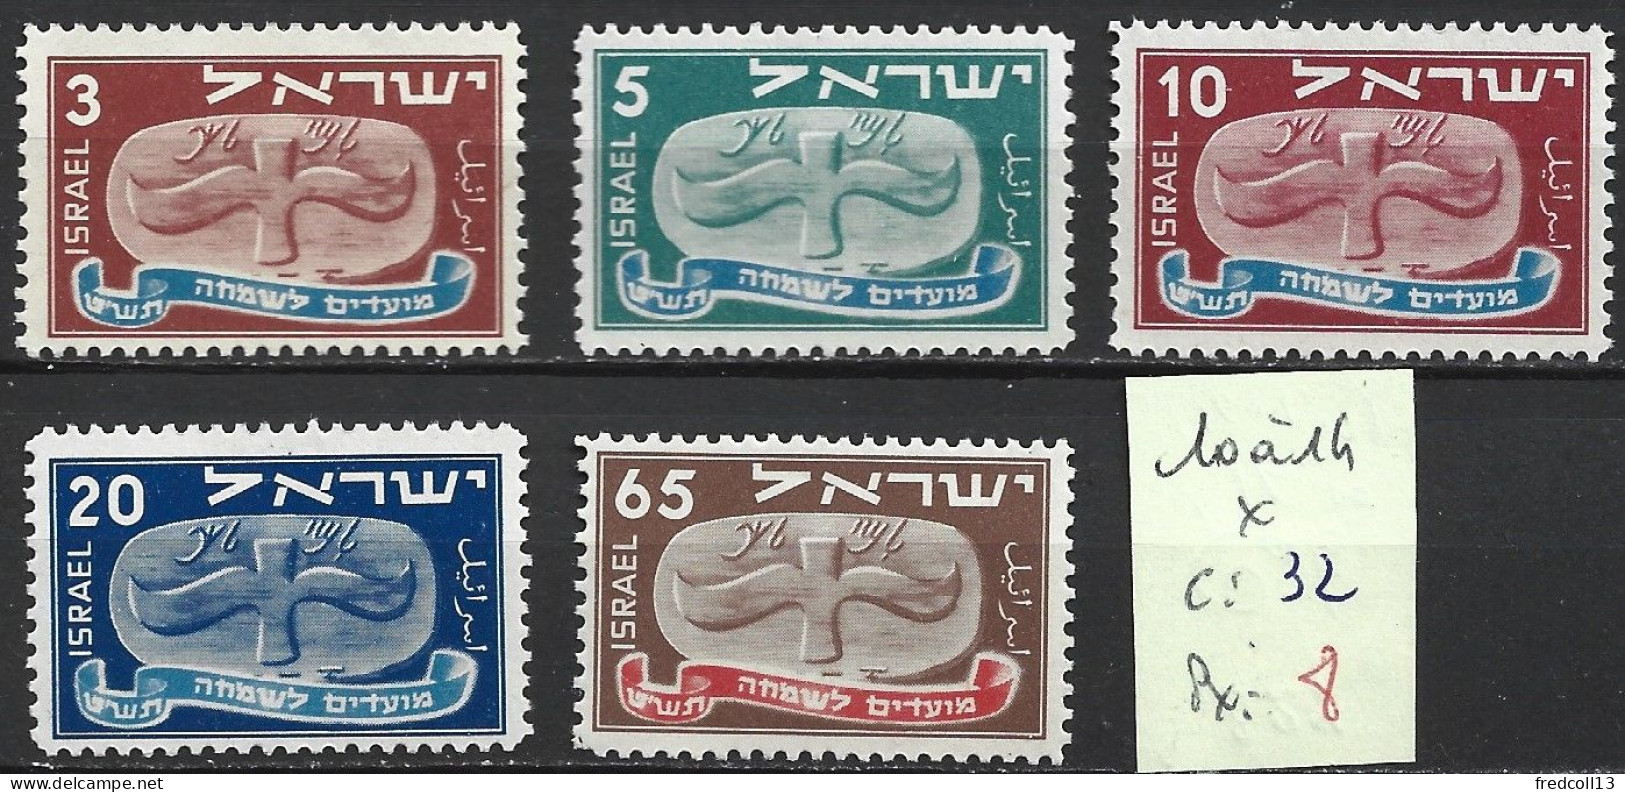 ISRAEL 10 à 14 * Côte 32 € - Unused Stamps (without Tabs)